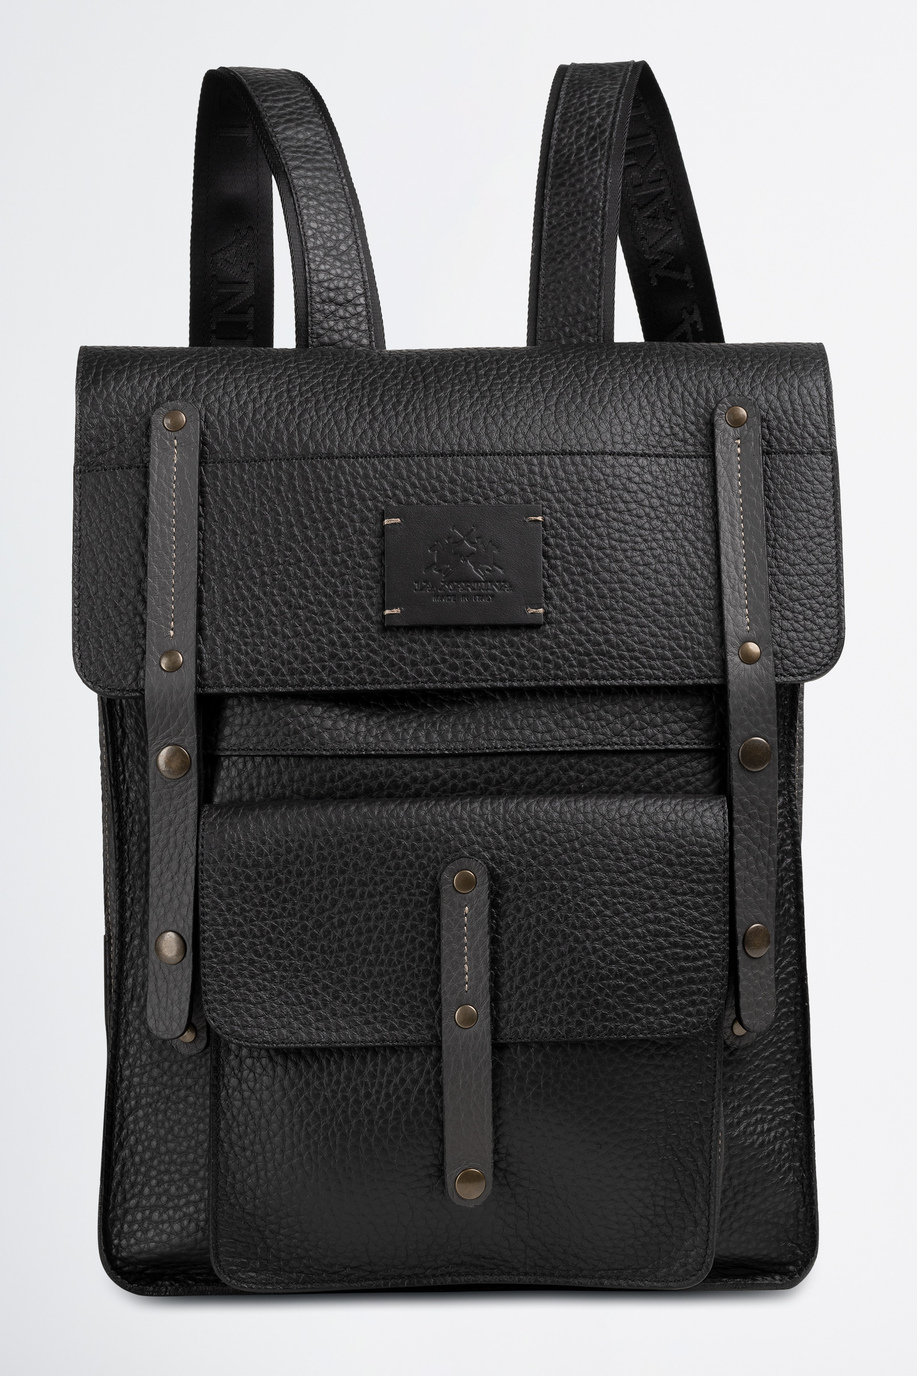 Backpack in calf leather leather - Accessories | La Martina - Official Online Shop